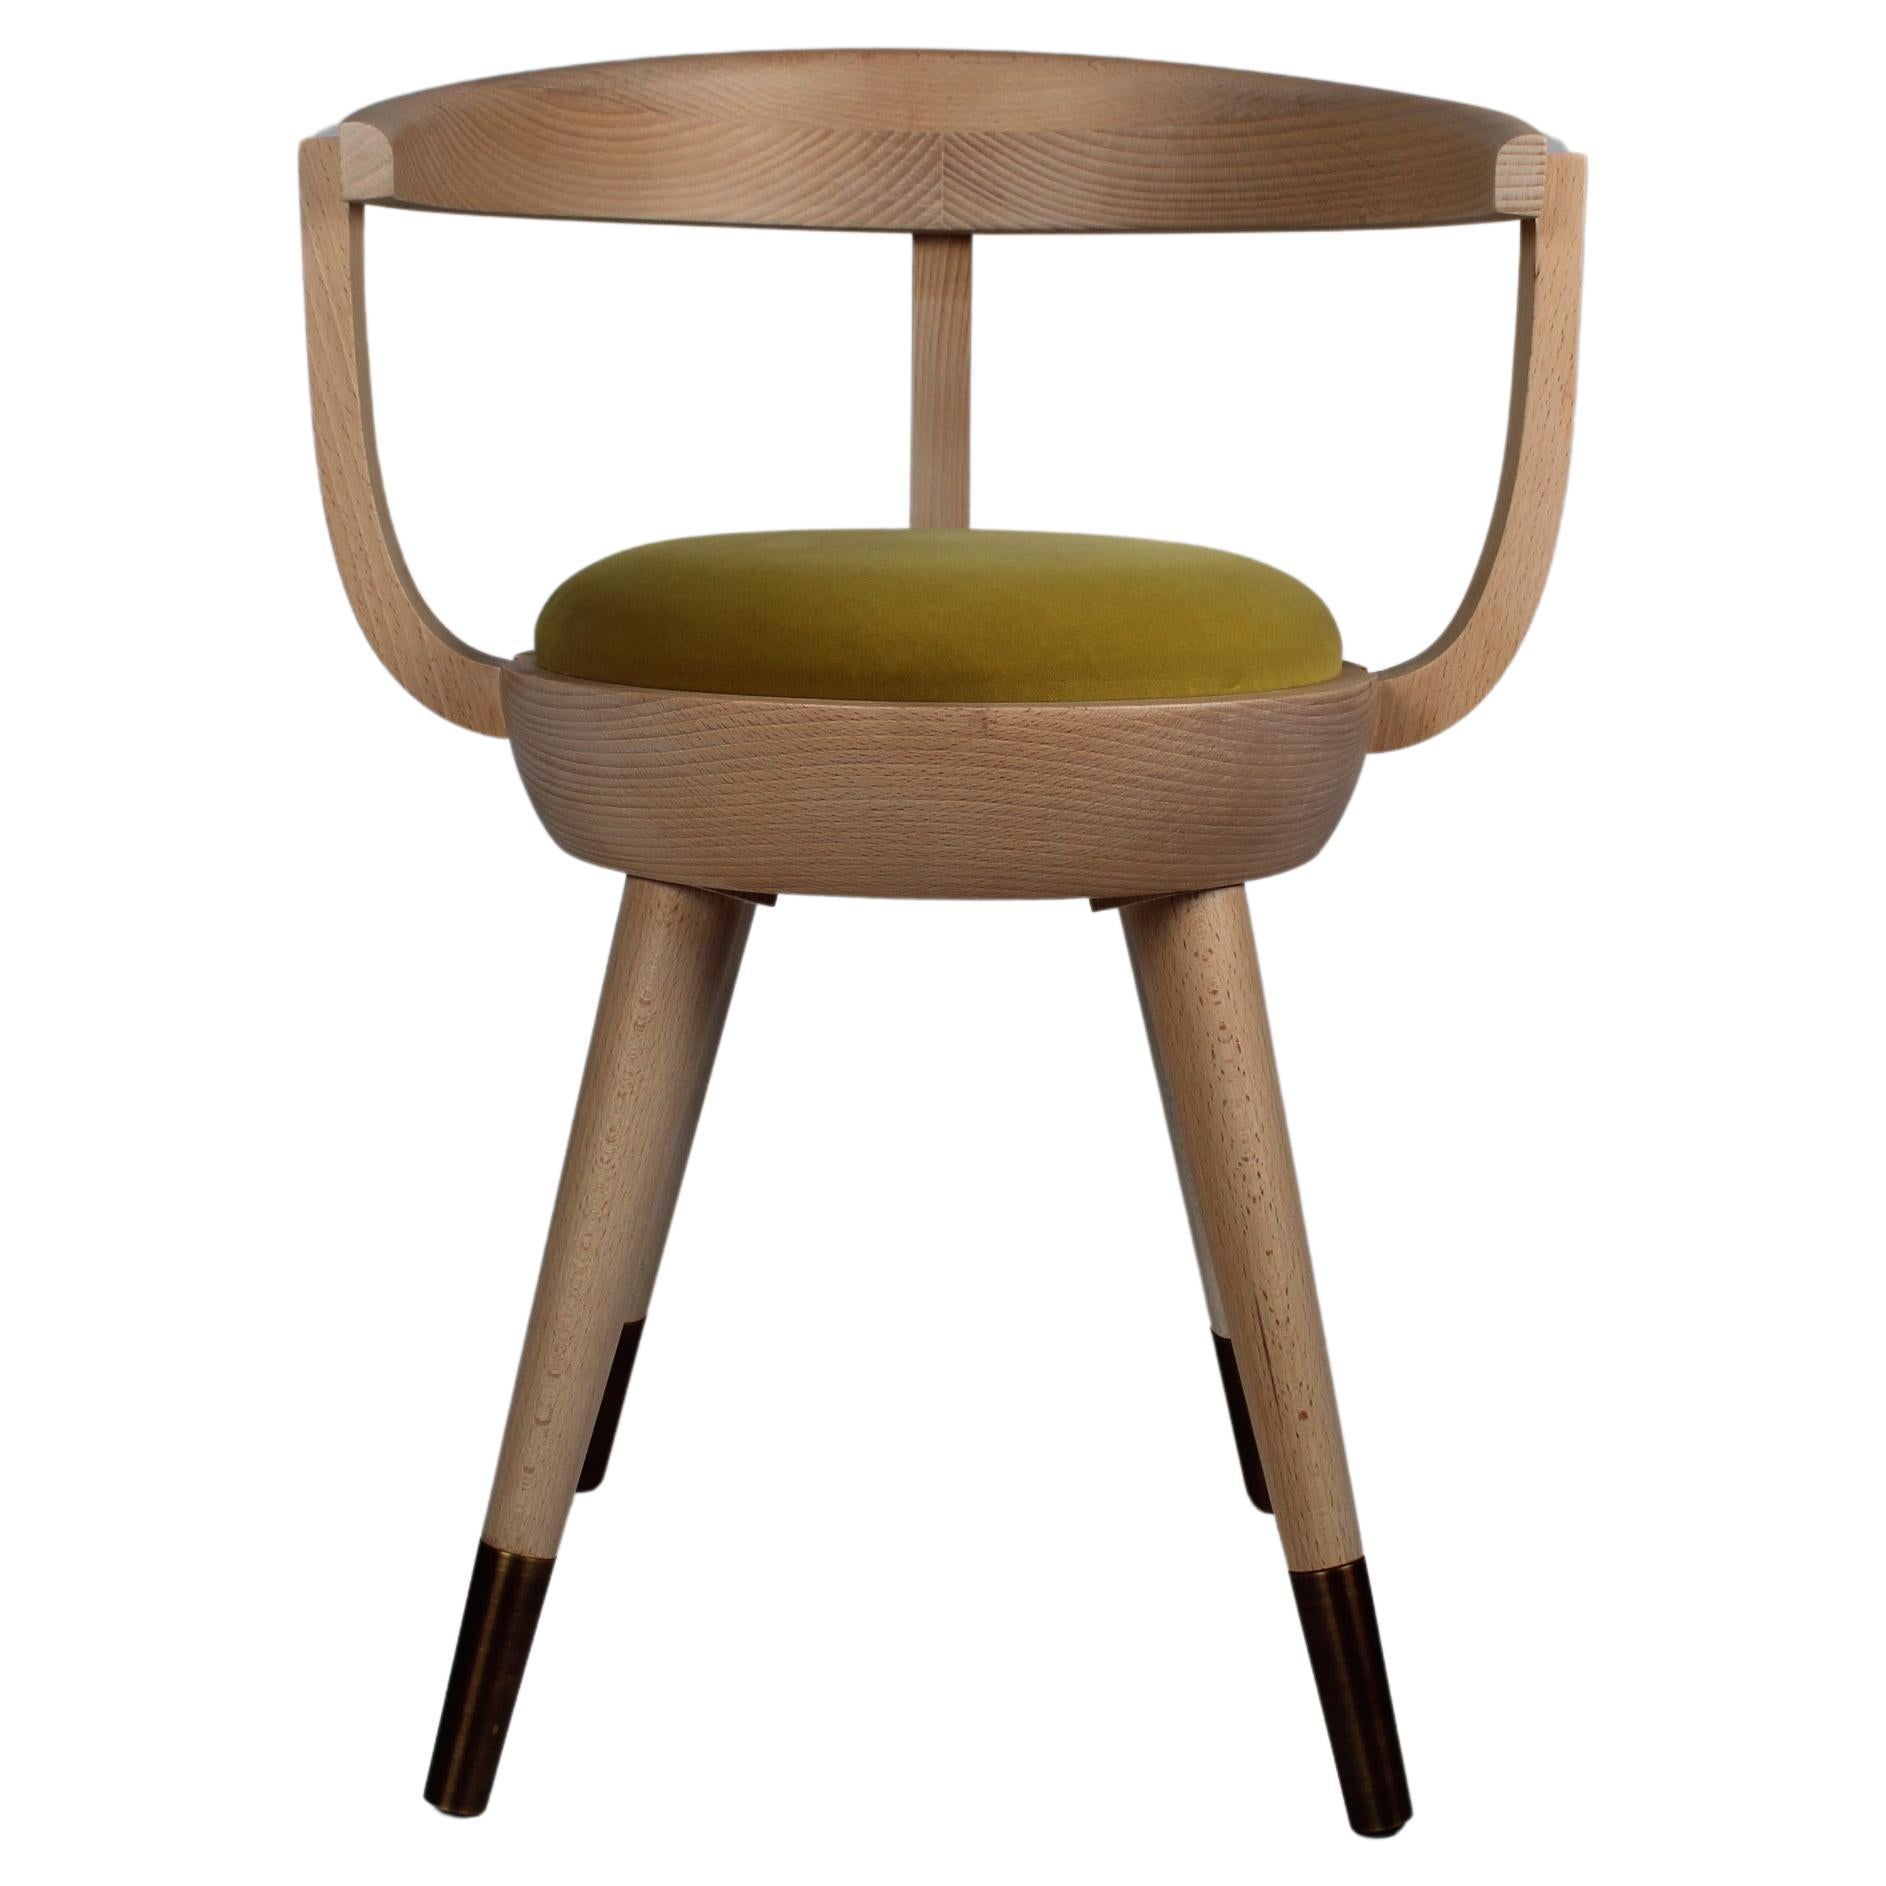 Galleon Ochre Chair in Solid Wood with Padded Seat and Brushed Brass Tips